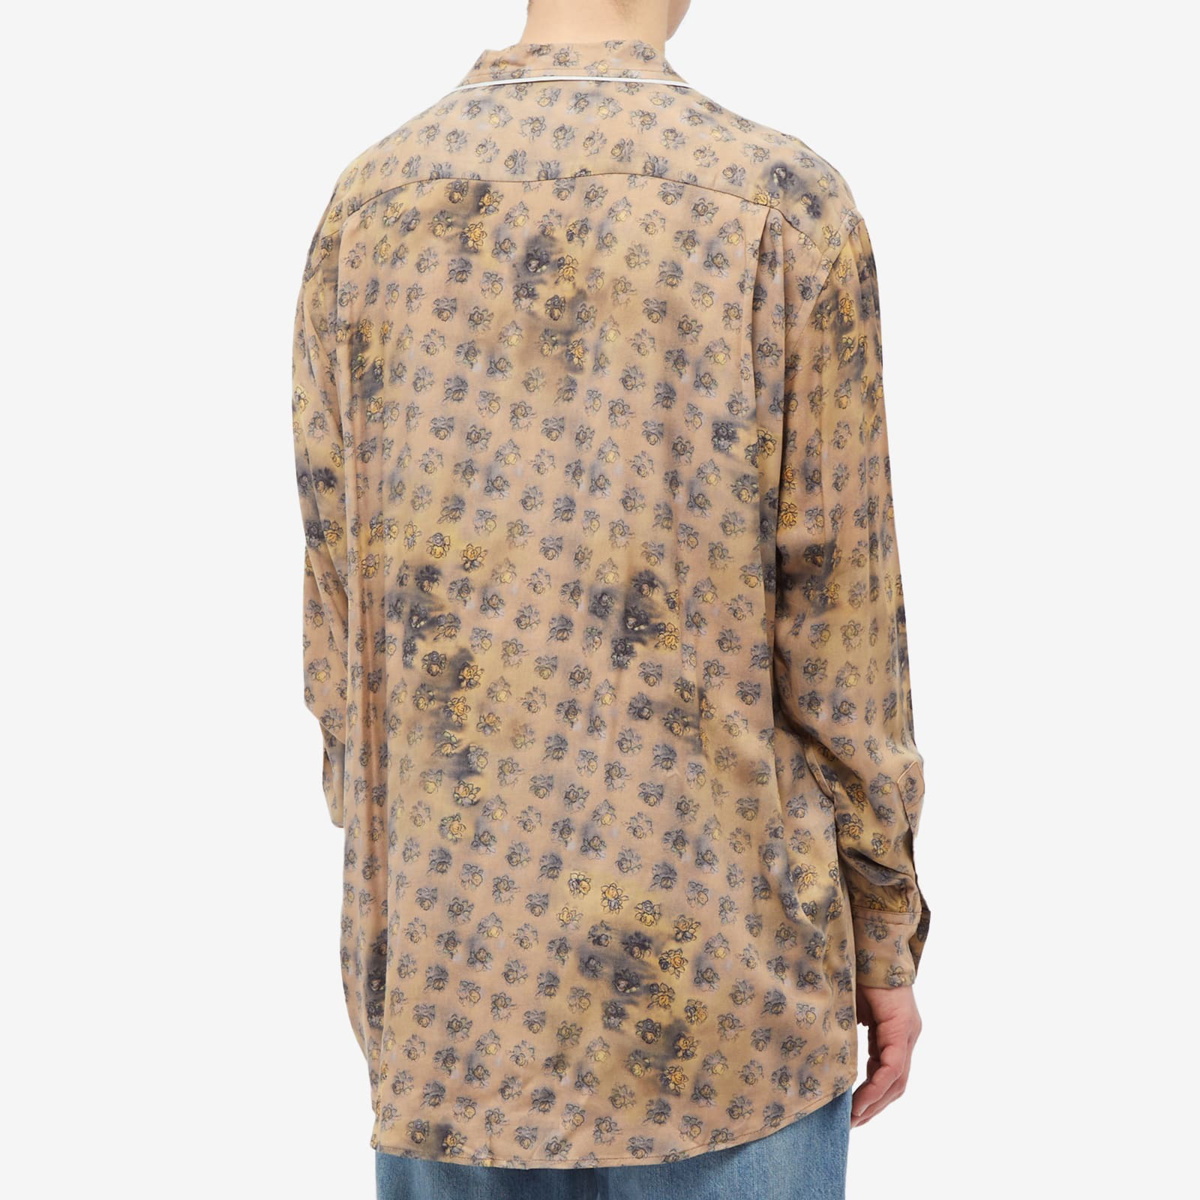 Acne Studios Men's Samper Washed Roses Shirt in Sand Beige/Yellow Acne ...